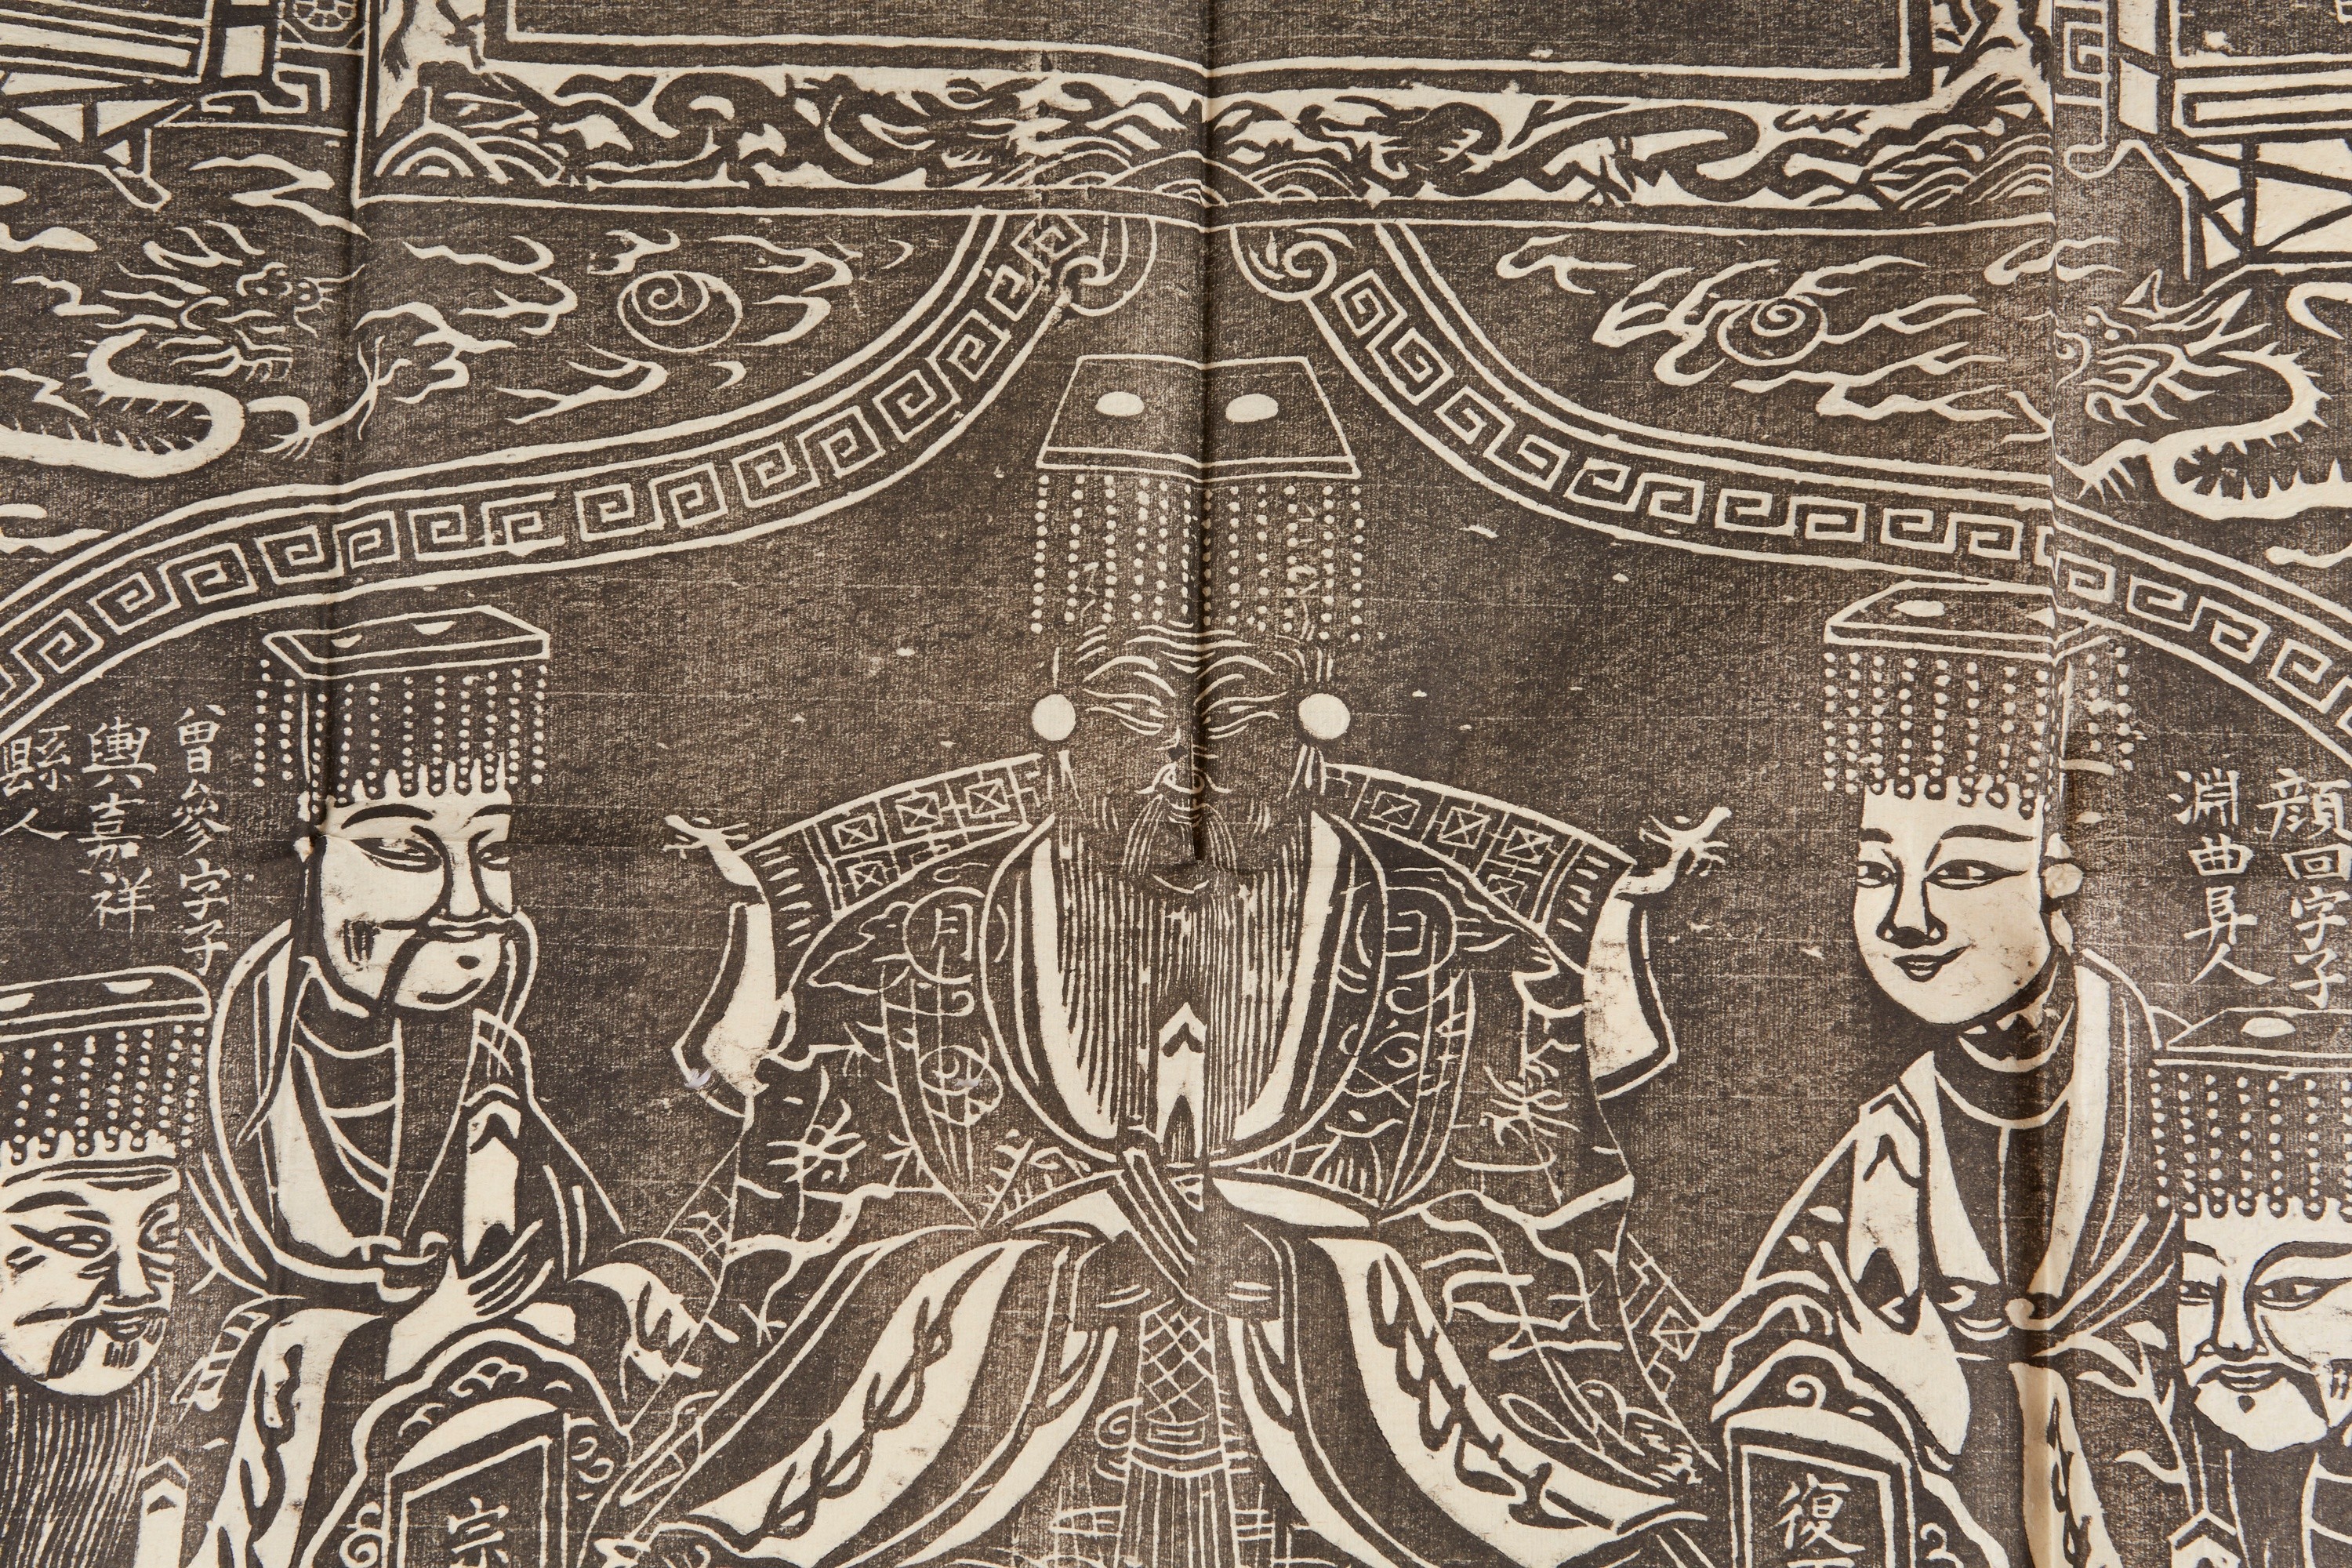 Group of Chinese Buddhist Temple Rubbings - Image 10 of 10